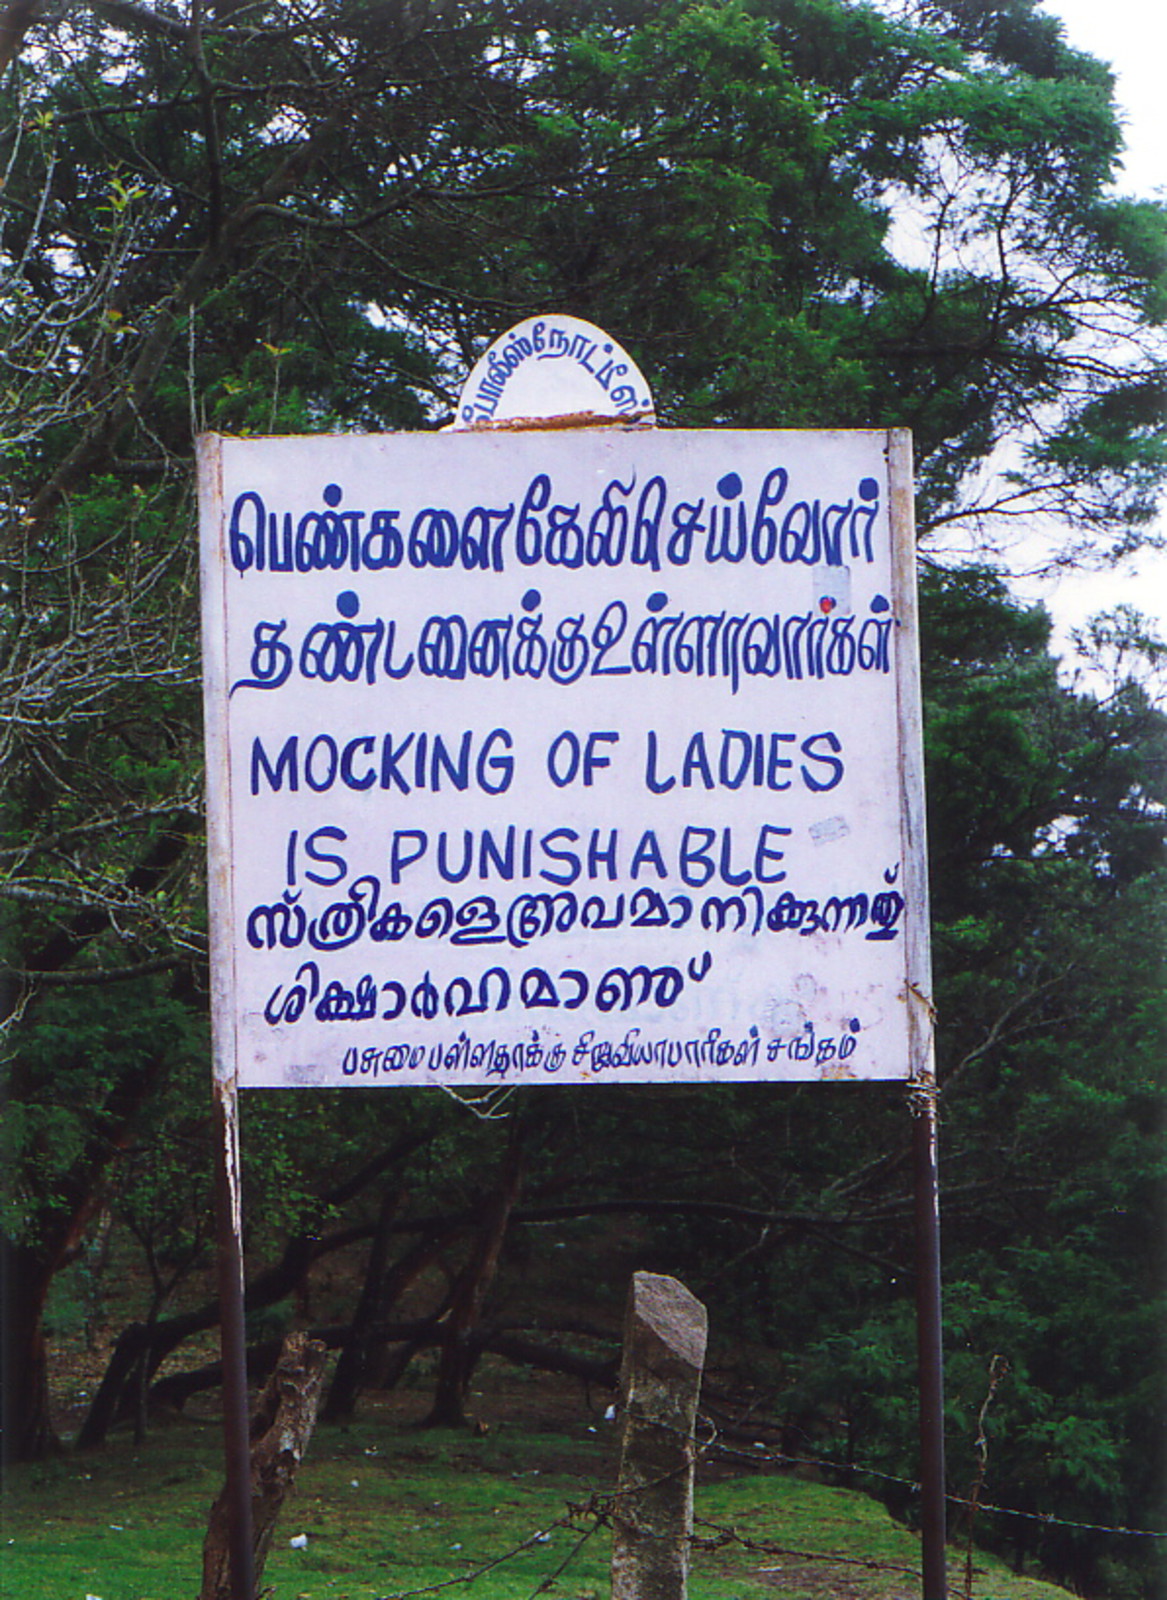 A sign saying 'Mocking of ladies is punishable'